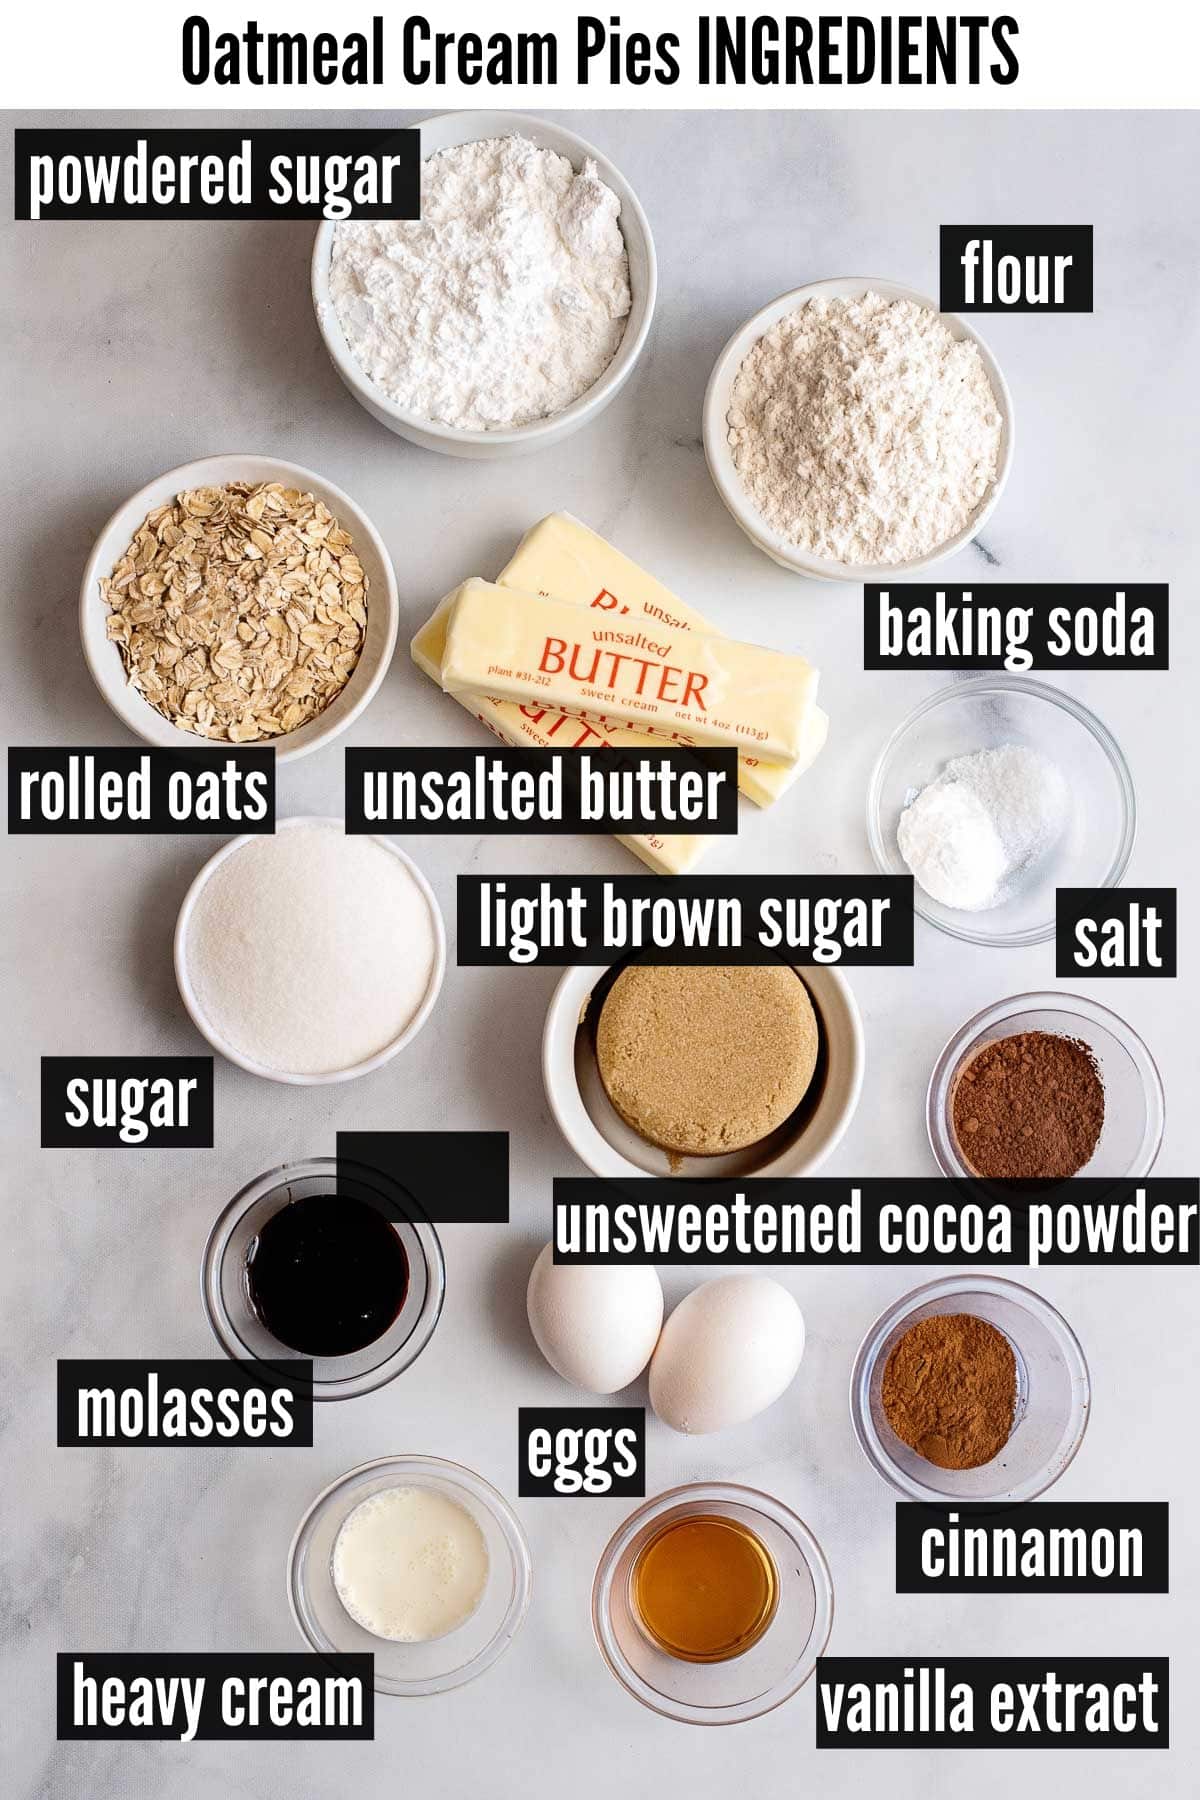 oatmeal cream pies labelled ingredients.